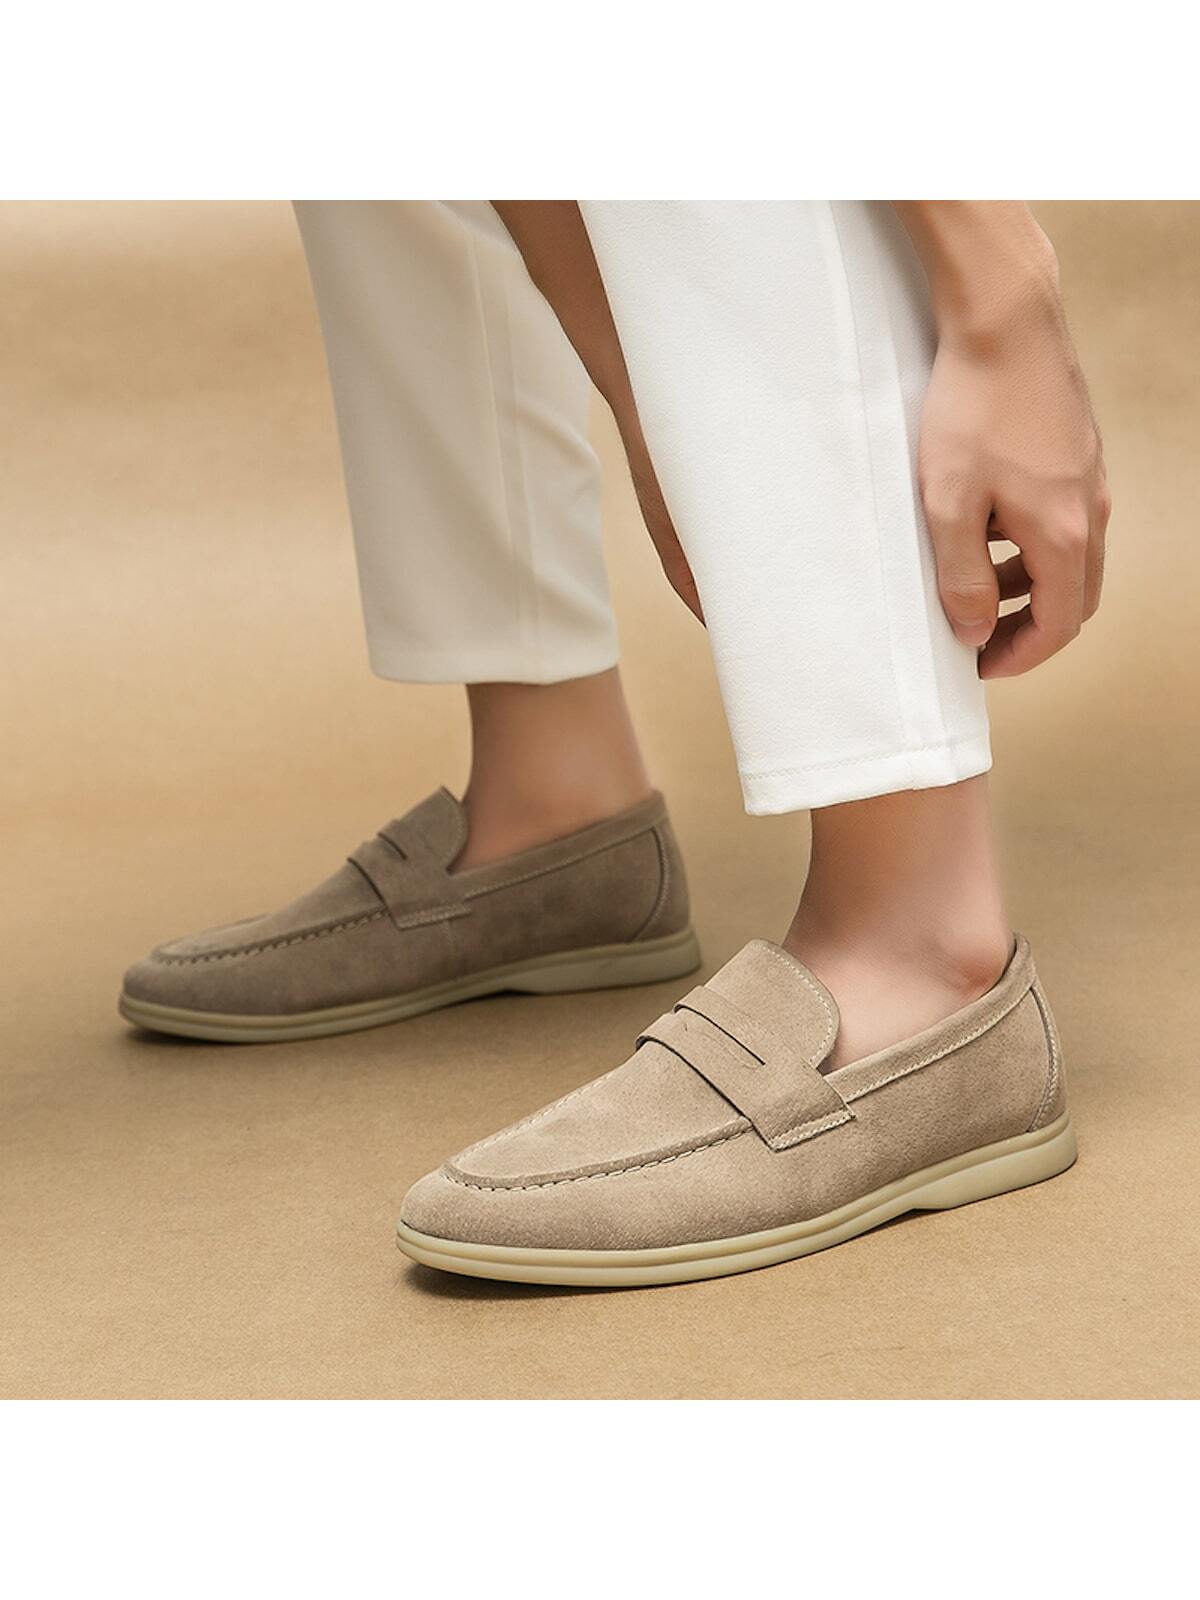 Men's Super Soft Leather Comfortable Loafers, Fabric, Low-top Slip-on Shoes, Business Formal Shoes, Minimalist Occupational Work Shoes, Casual Shoes, Fashionable Trendy Men's Dress Shoes, Round Toe Comfortable England Style Formal Shoes, Dress Shoes, All